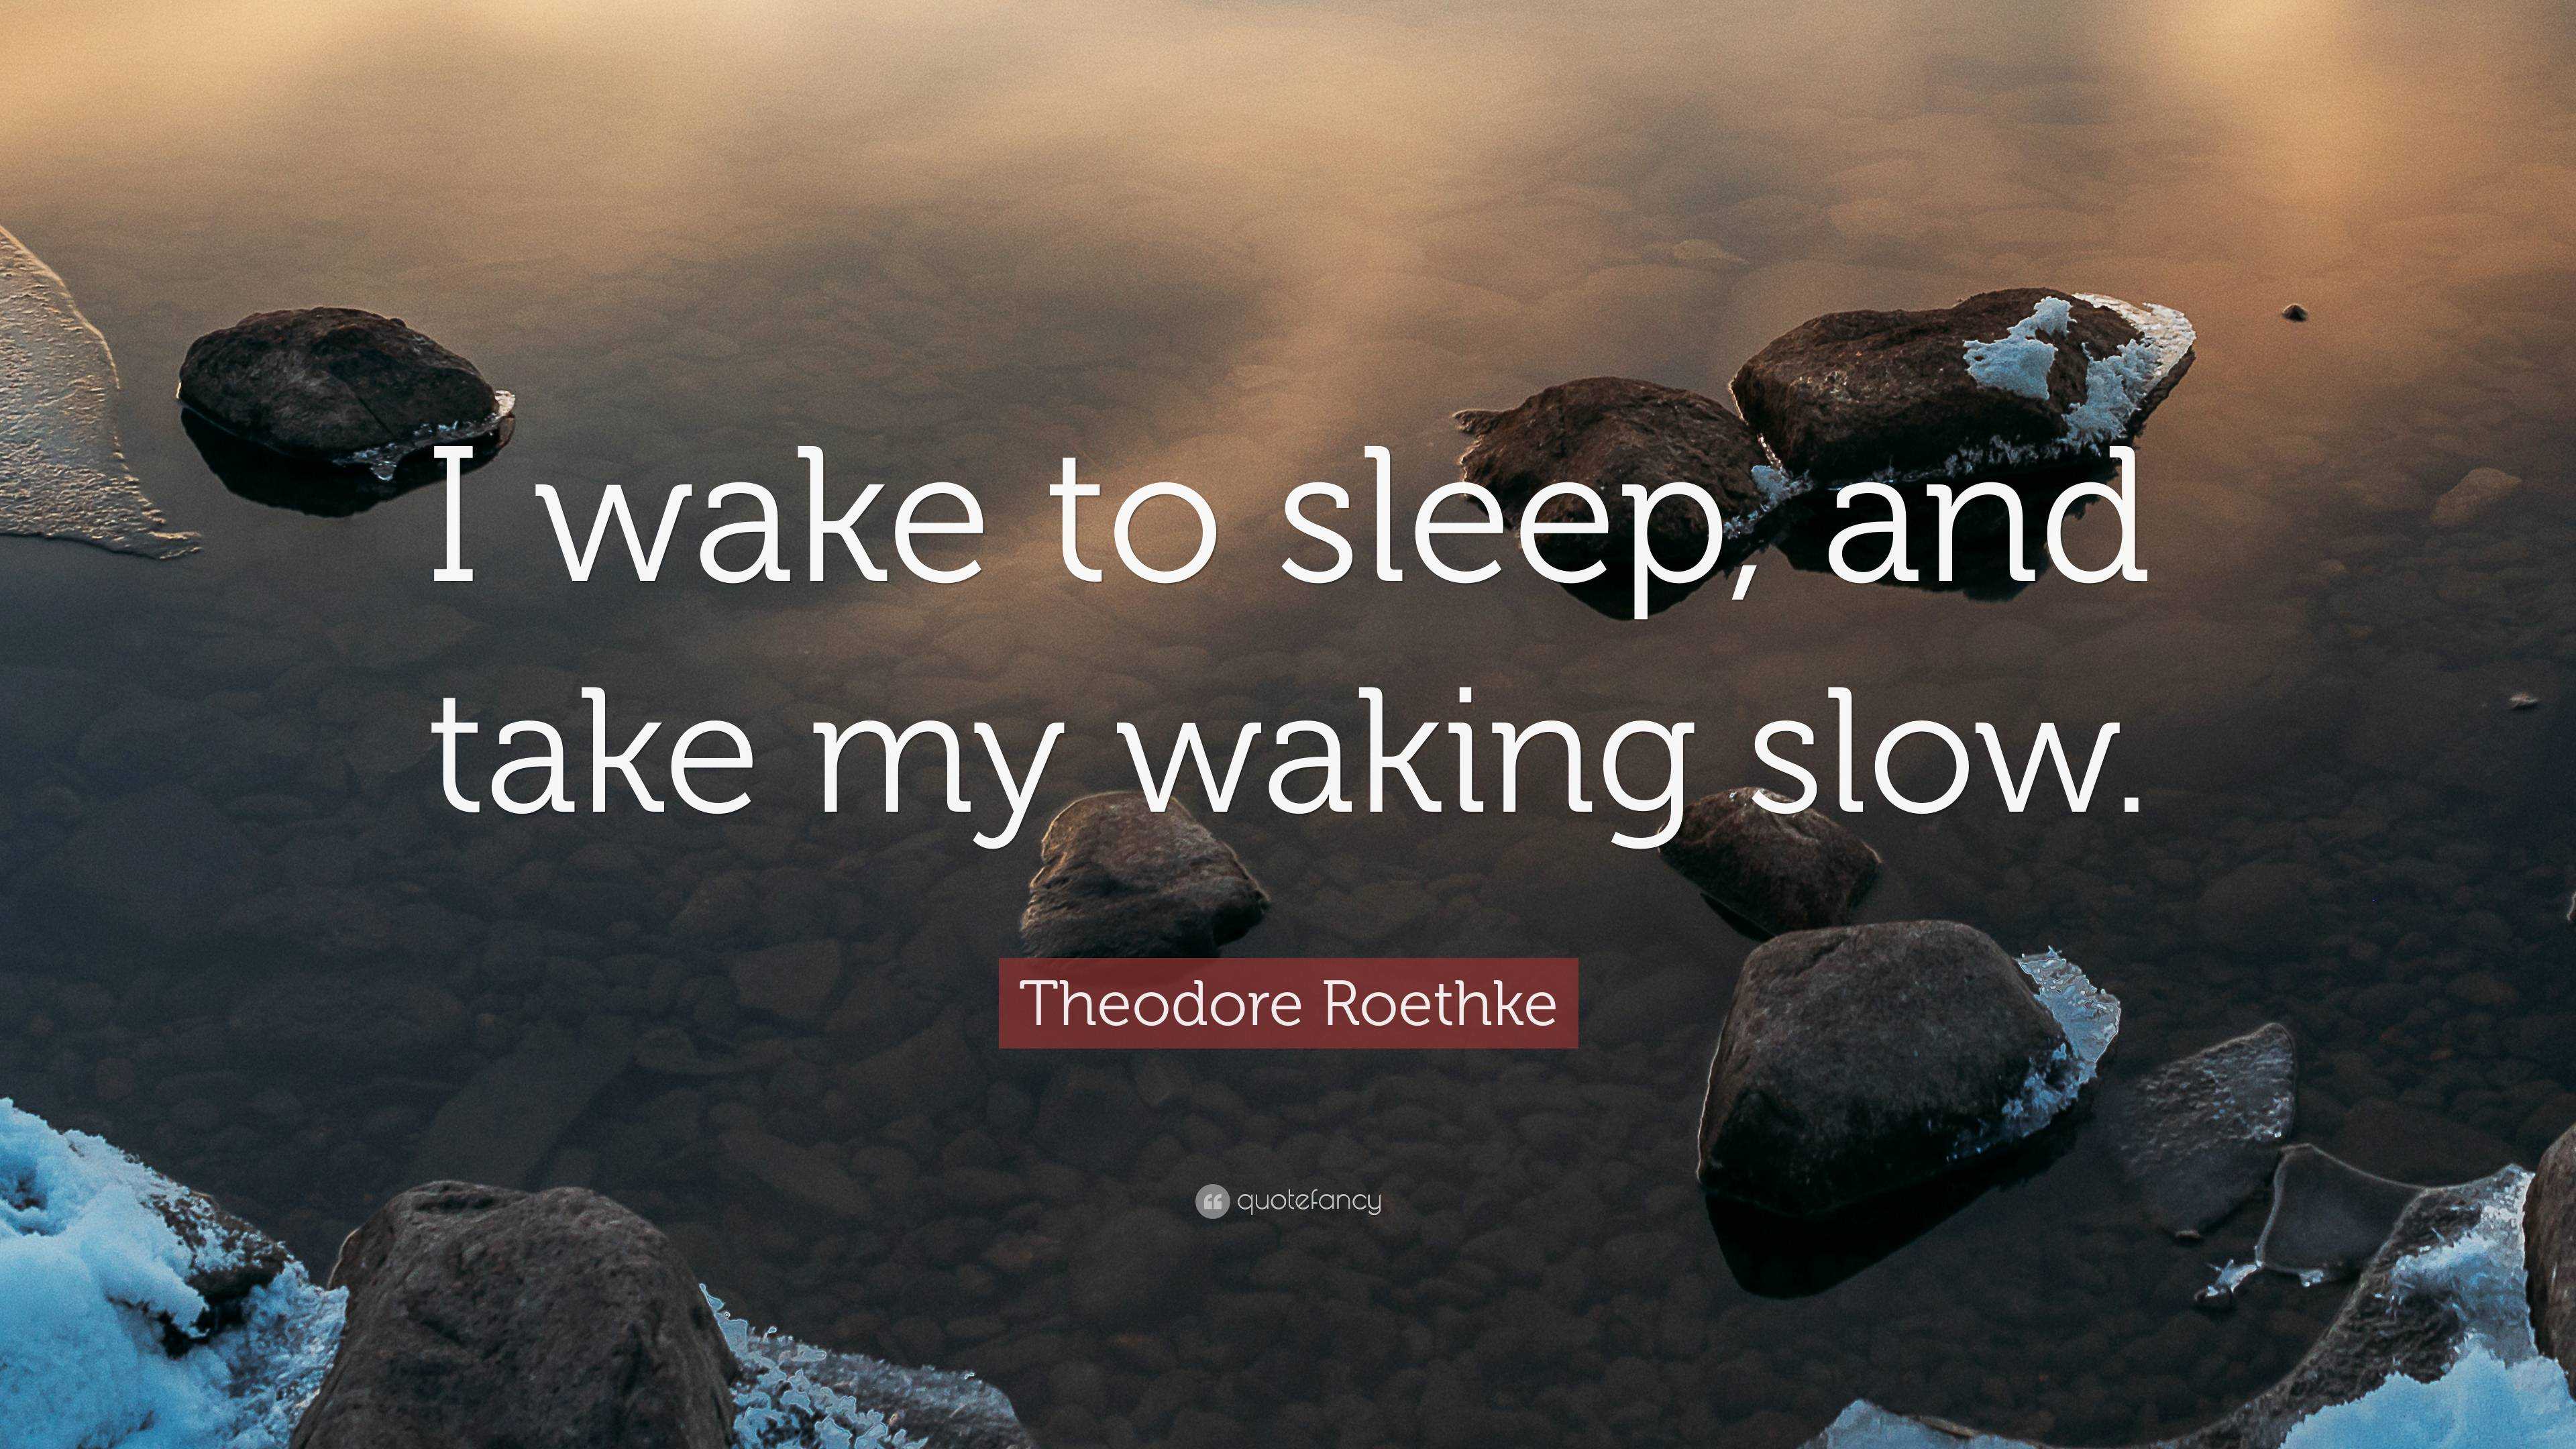 Theodore Roethke Quote I Wake To Sleep And Take My Waking Slow 2 Wallpapers Quotefancy